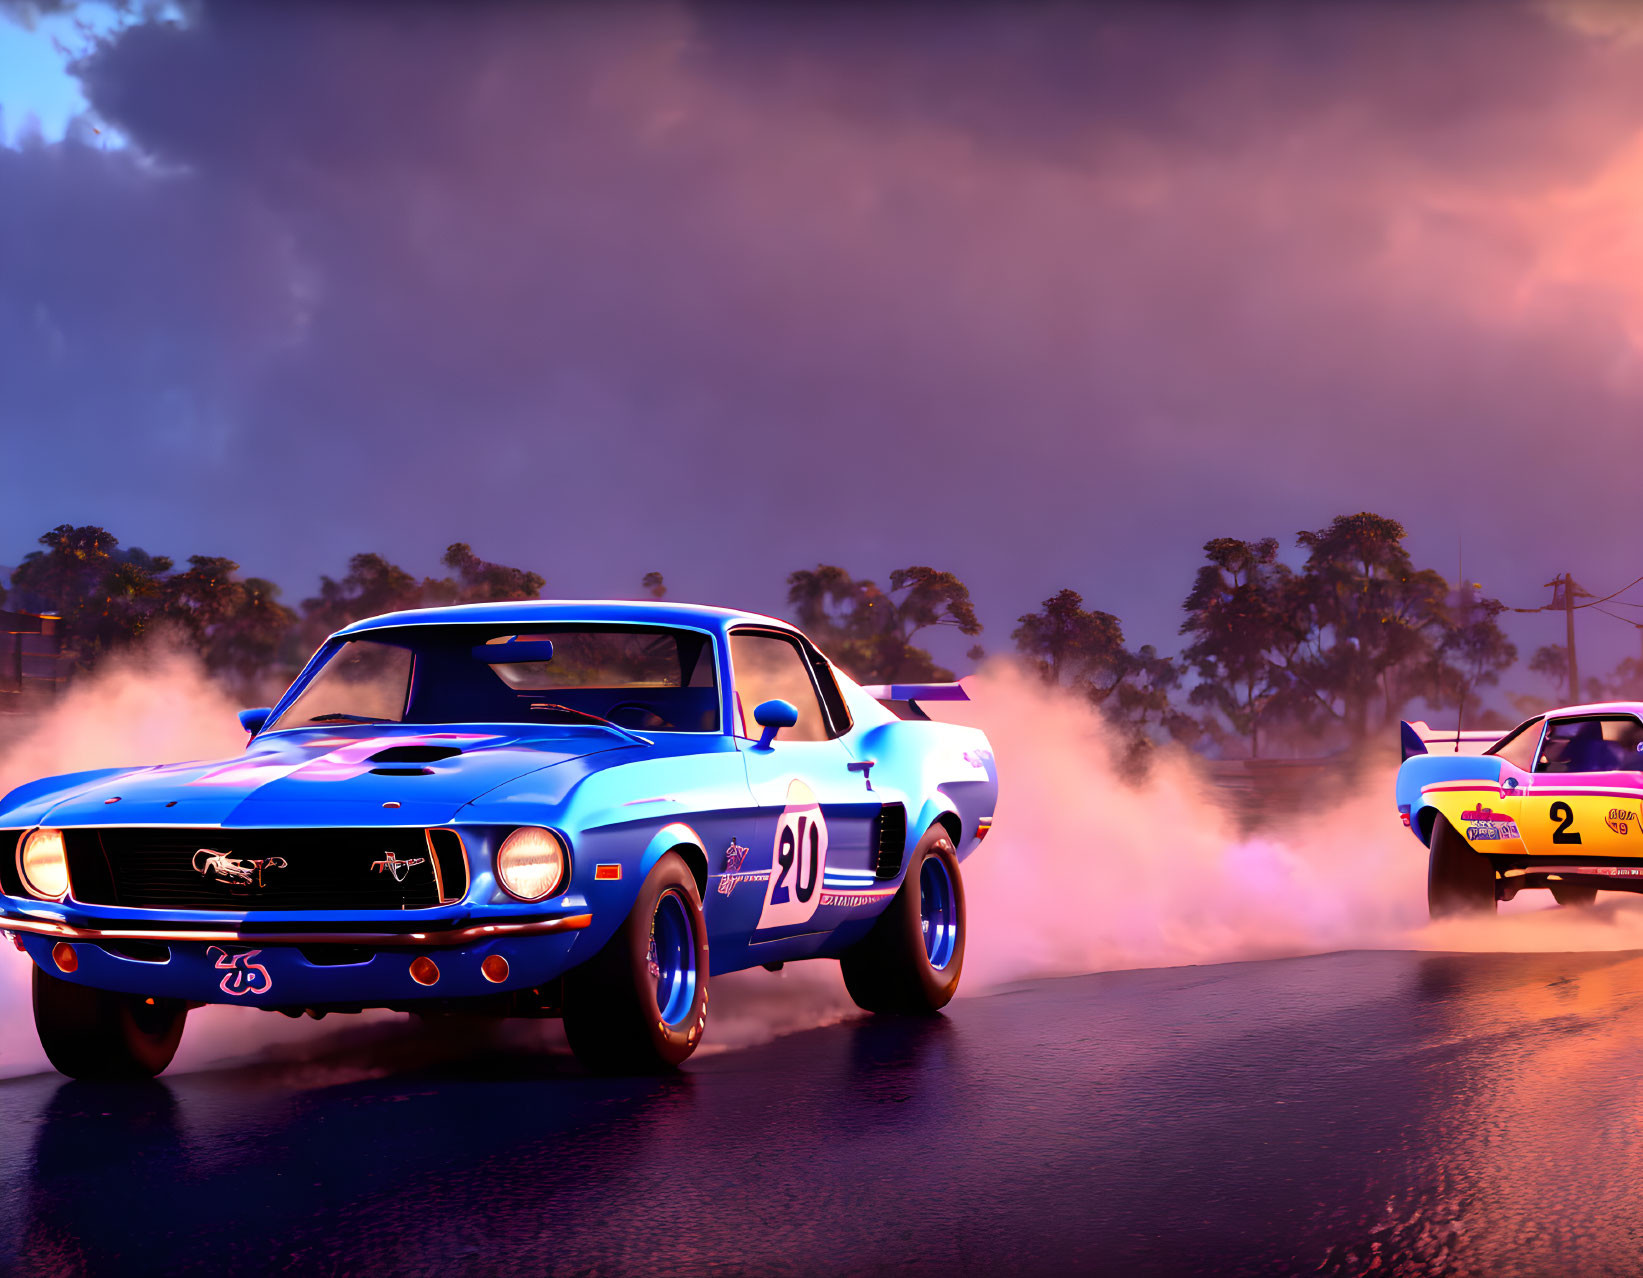 Vintage Muscle Cars Racing at Dusk with Blue Car Emitting Tire Smoke